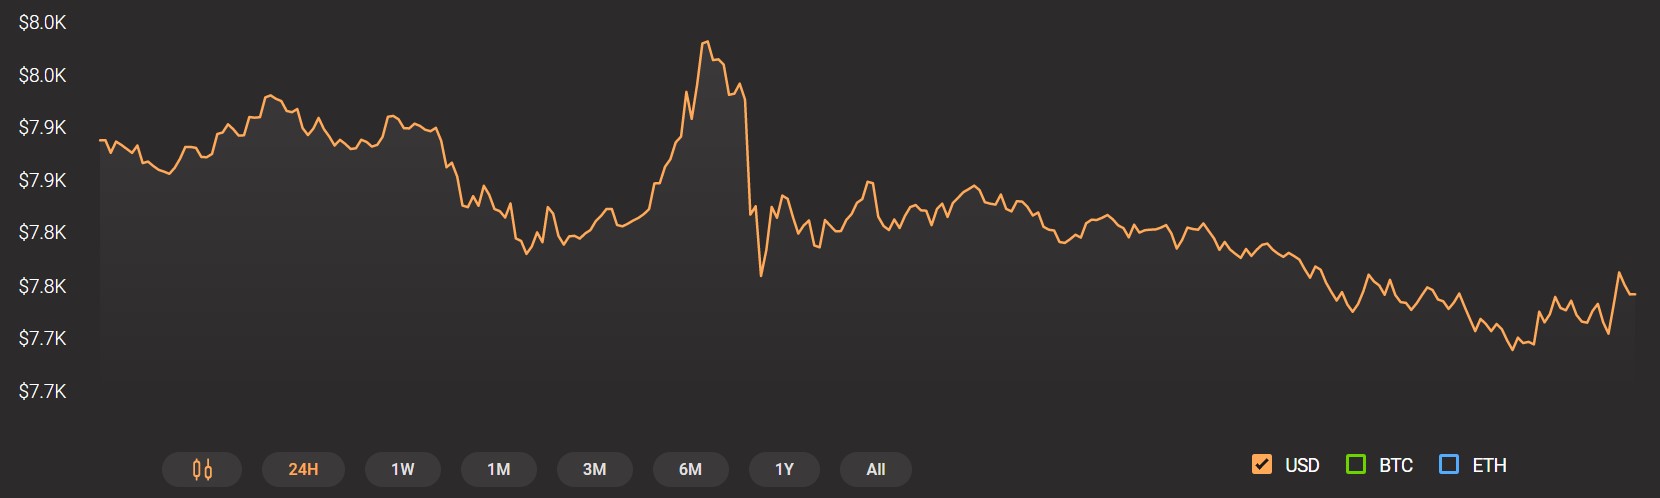 Bitcoin difficulty predicted to reach a new ATH of 15TH/s